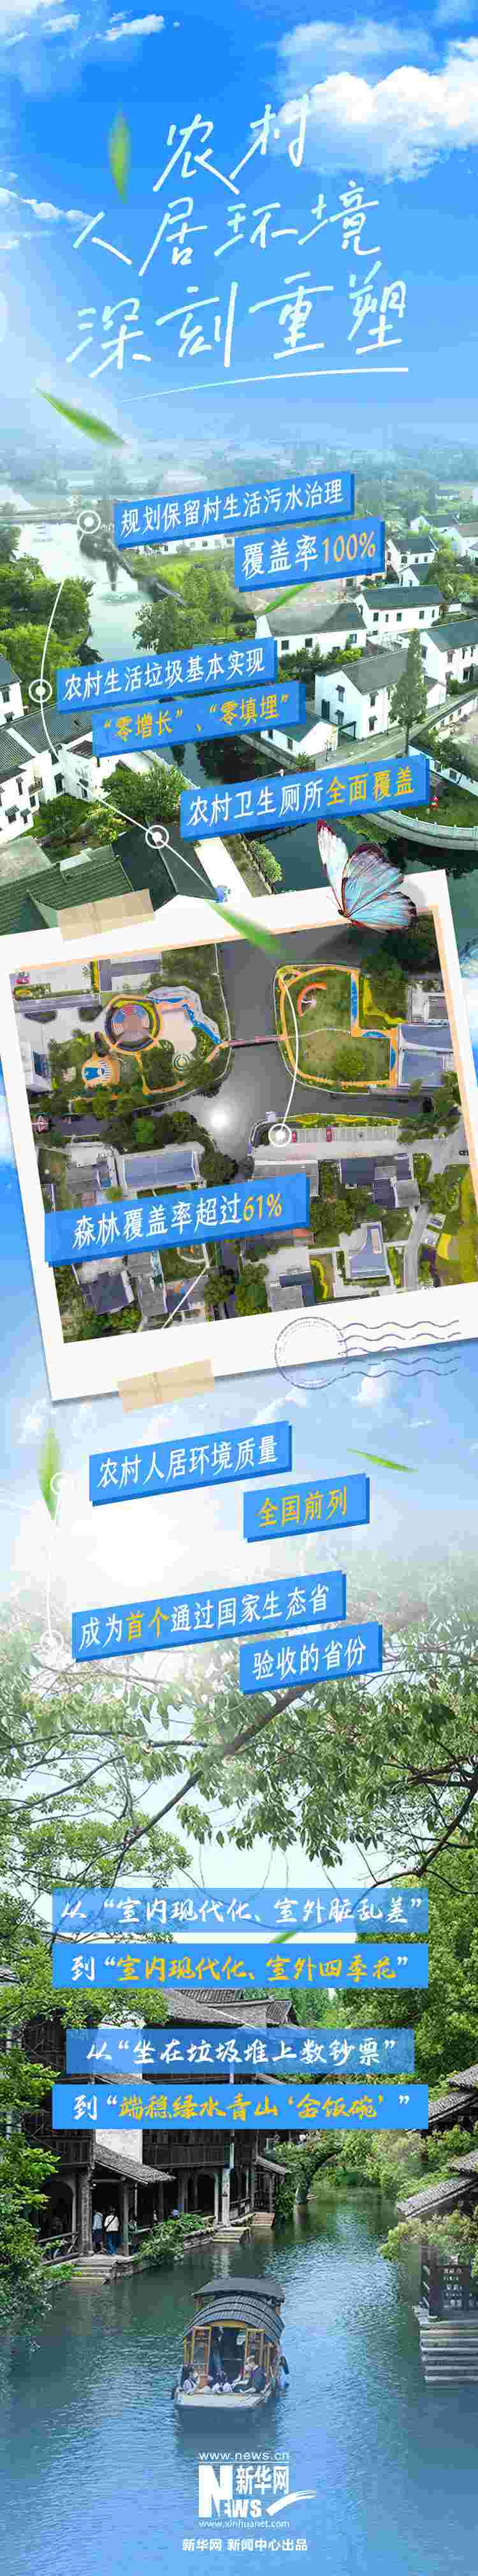 The Beauty of Countryside | Why Are Green Waters and Green Mountains Gold and Silver Mountains? "Million Project" gives you the answer, Chen Jingchao | Future | Zhejiang | Beauty | Planning | Rural | Promotion | Engineering | Ecology | Thousand Villages